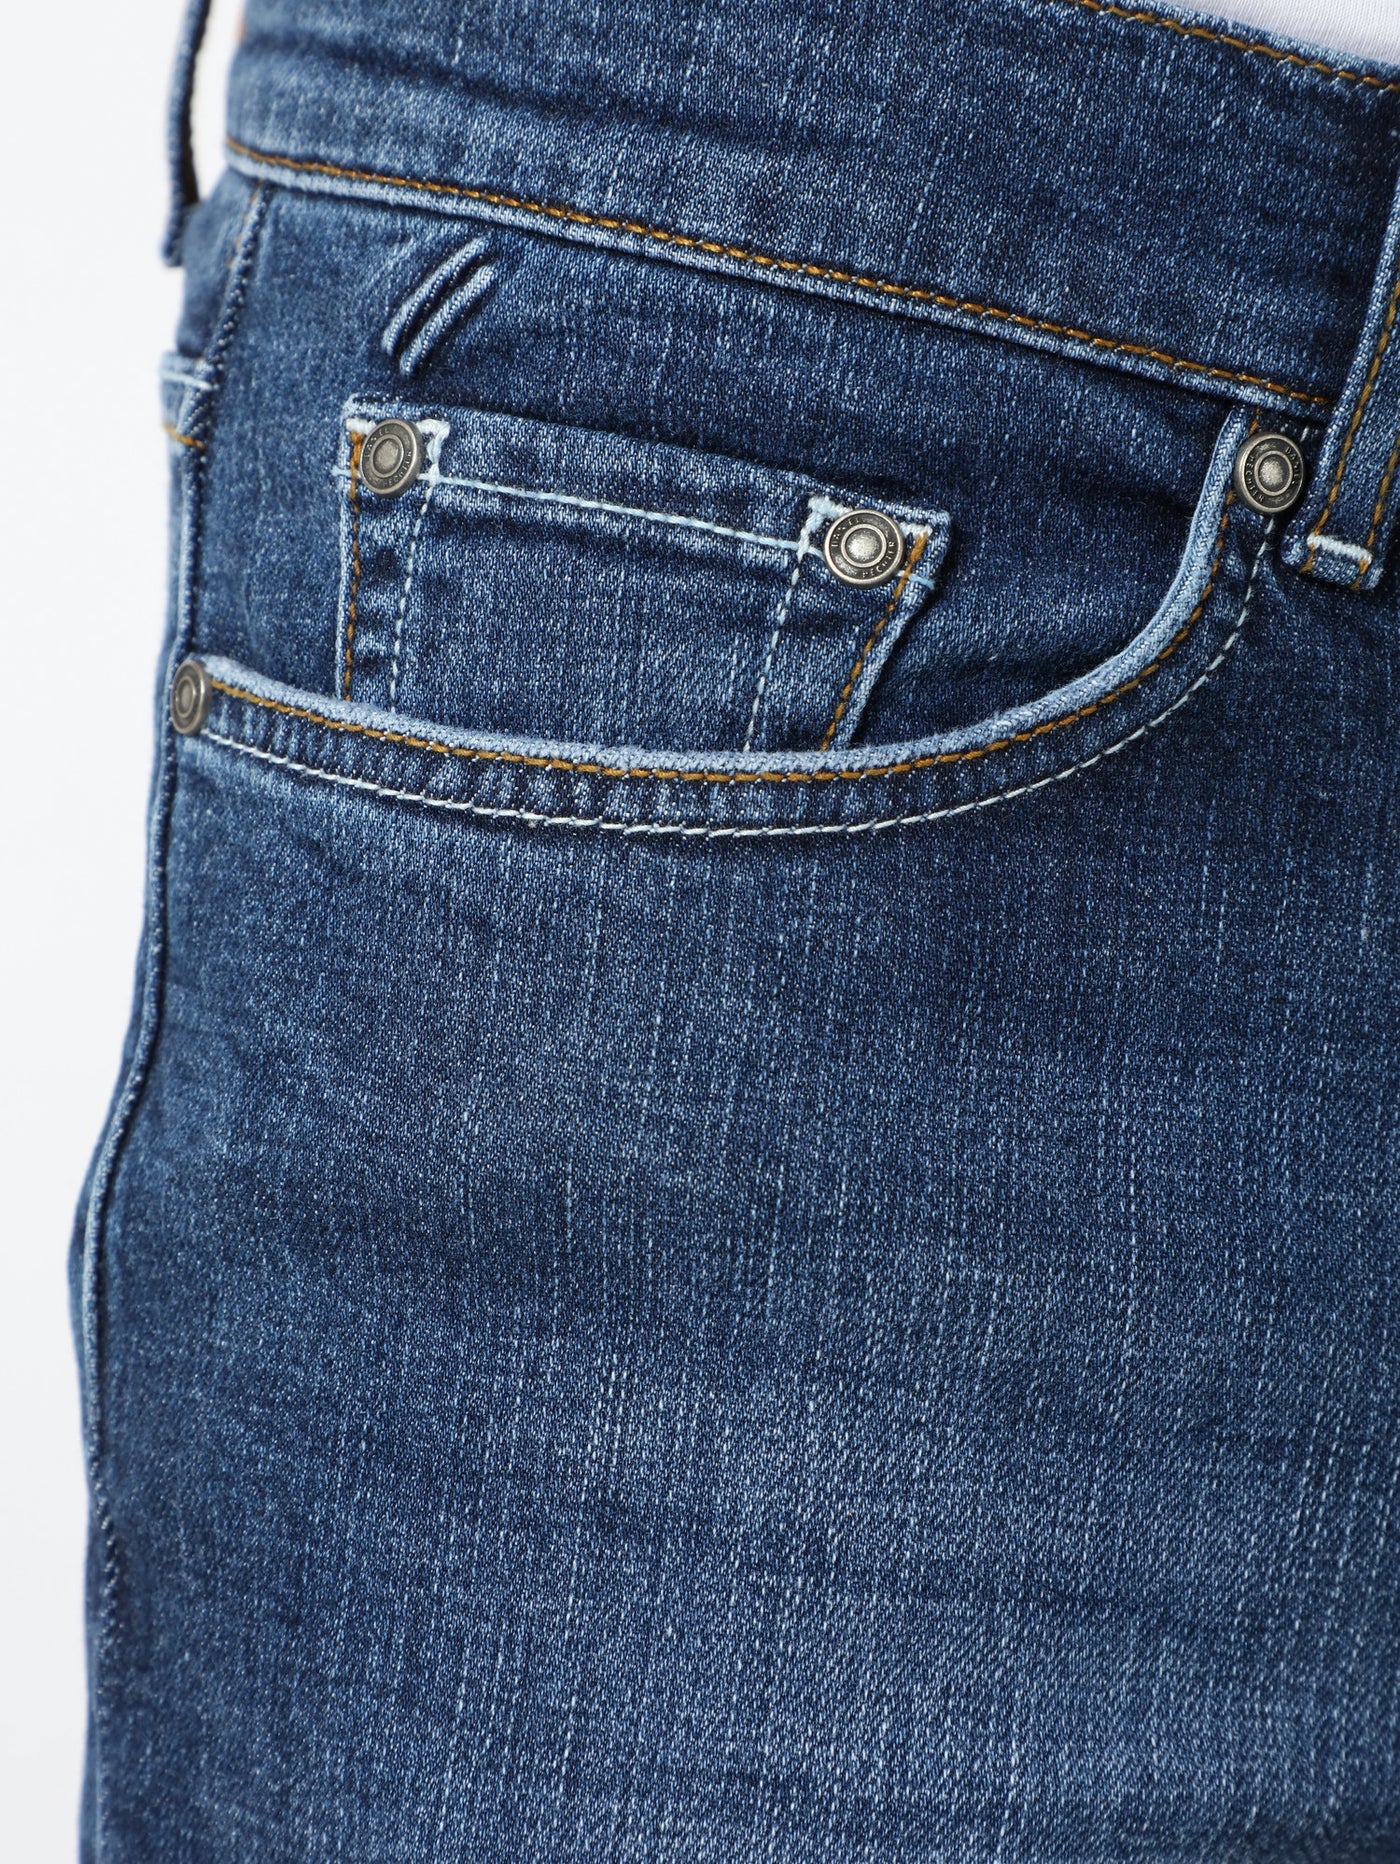 Denim Pants - Straight Fit - Washed Effect